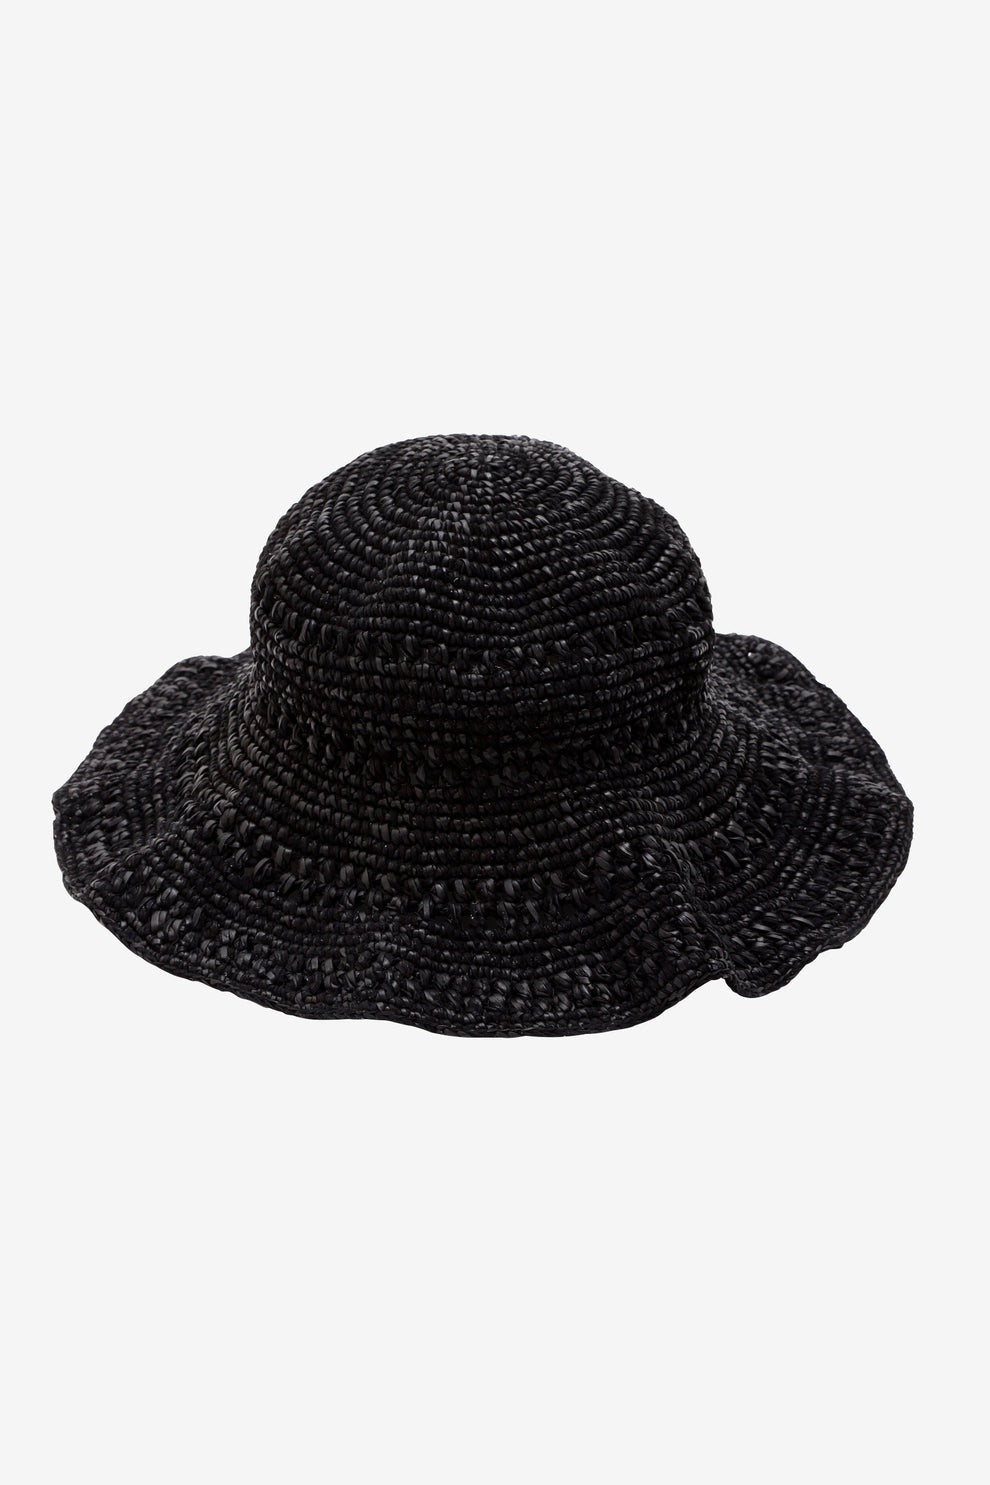 BRAIDED LEATHER HAT(GOAT LEATHER)